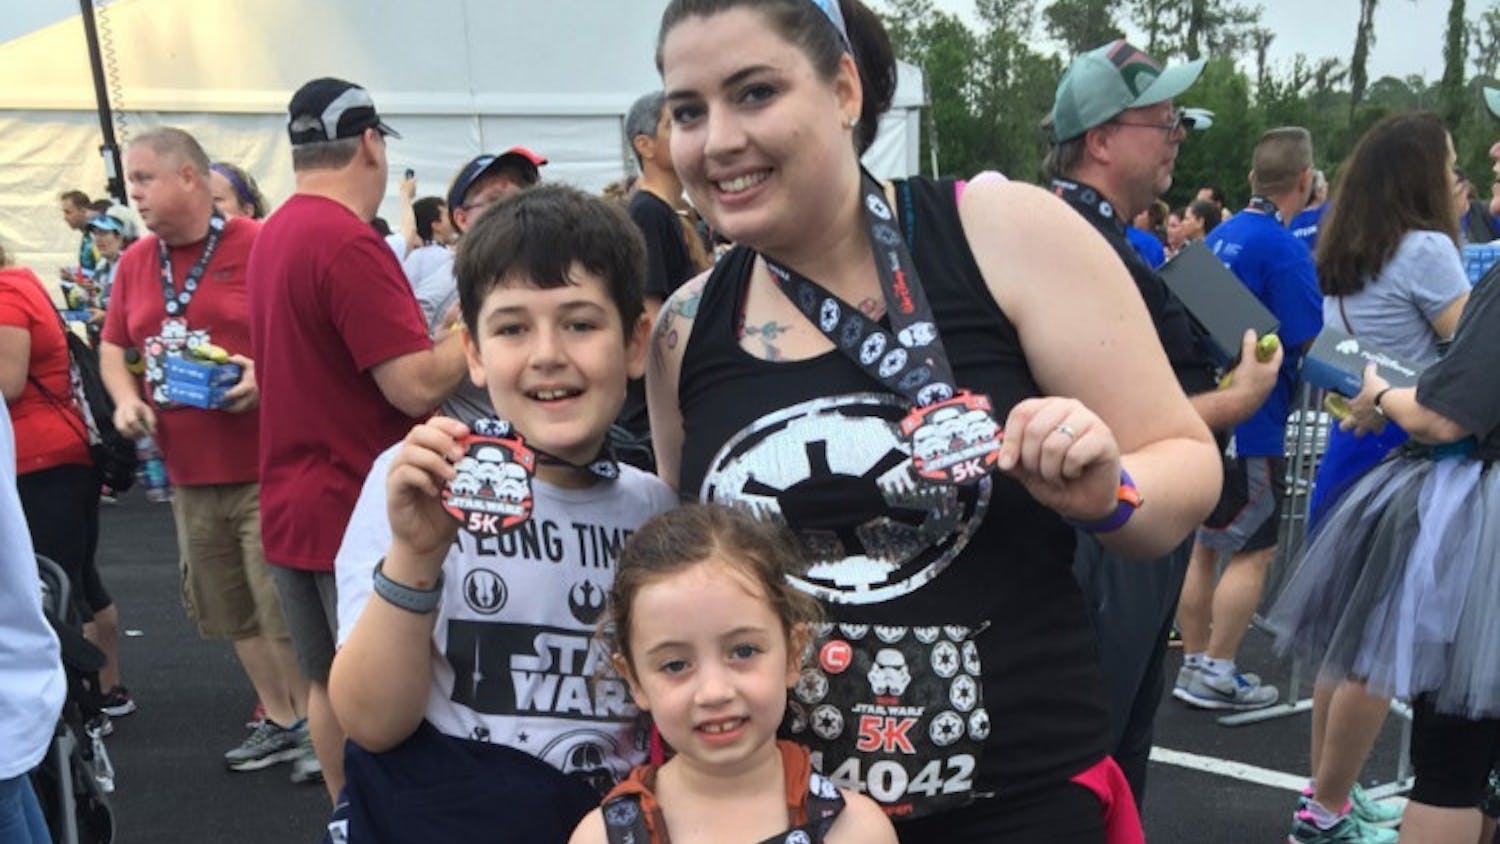 Jennifer Ford, a 32-year-old senior graphic designer for UF Online, is running to raise money for Noah’s Light Foundation, which aims to find a cure for pediatric brain cancer. Though she ran a 5K in April, she said this will be her longest race. 